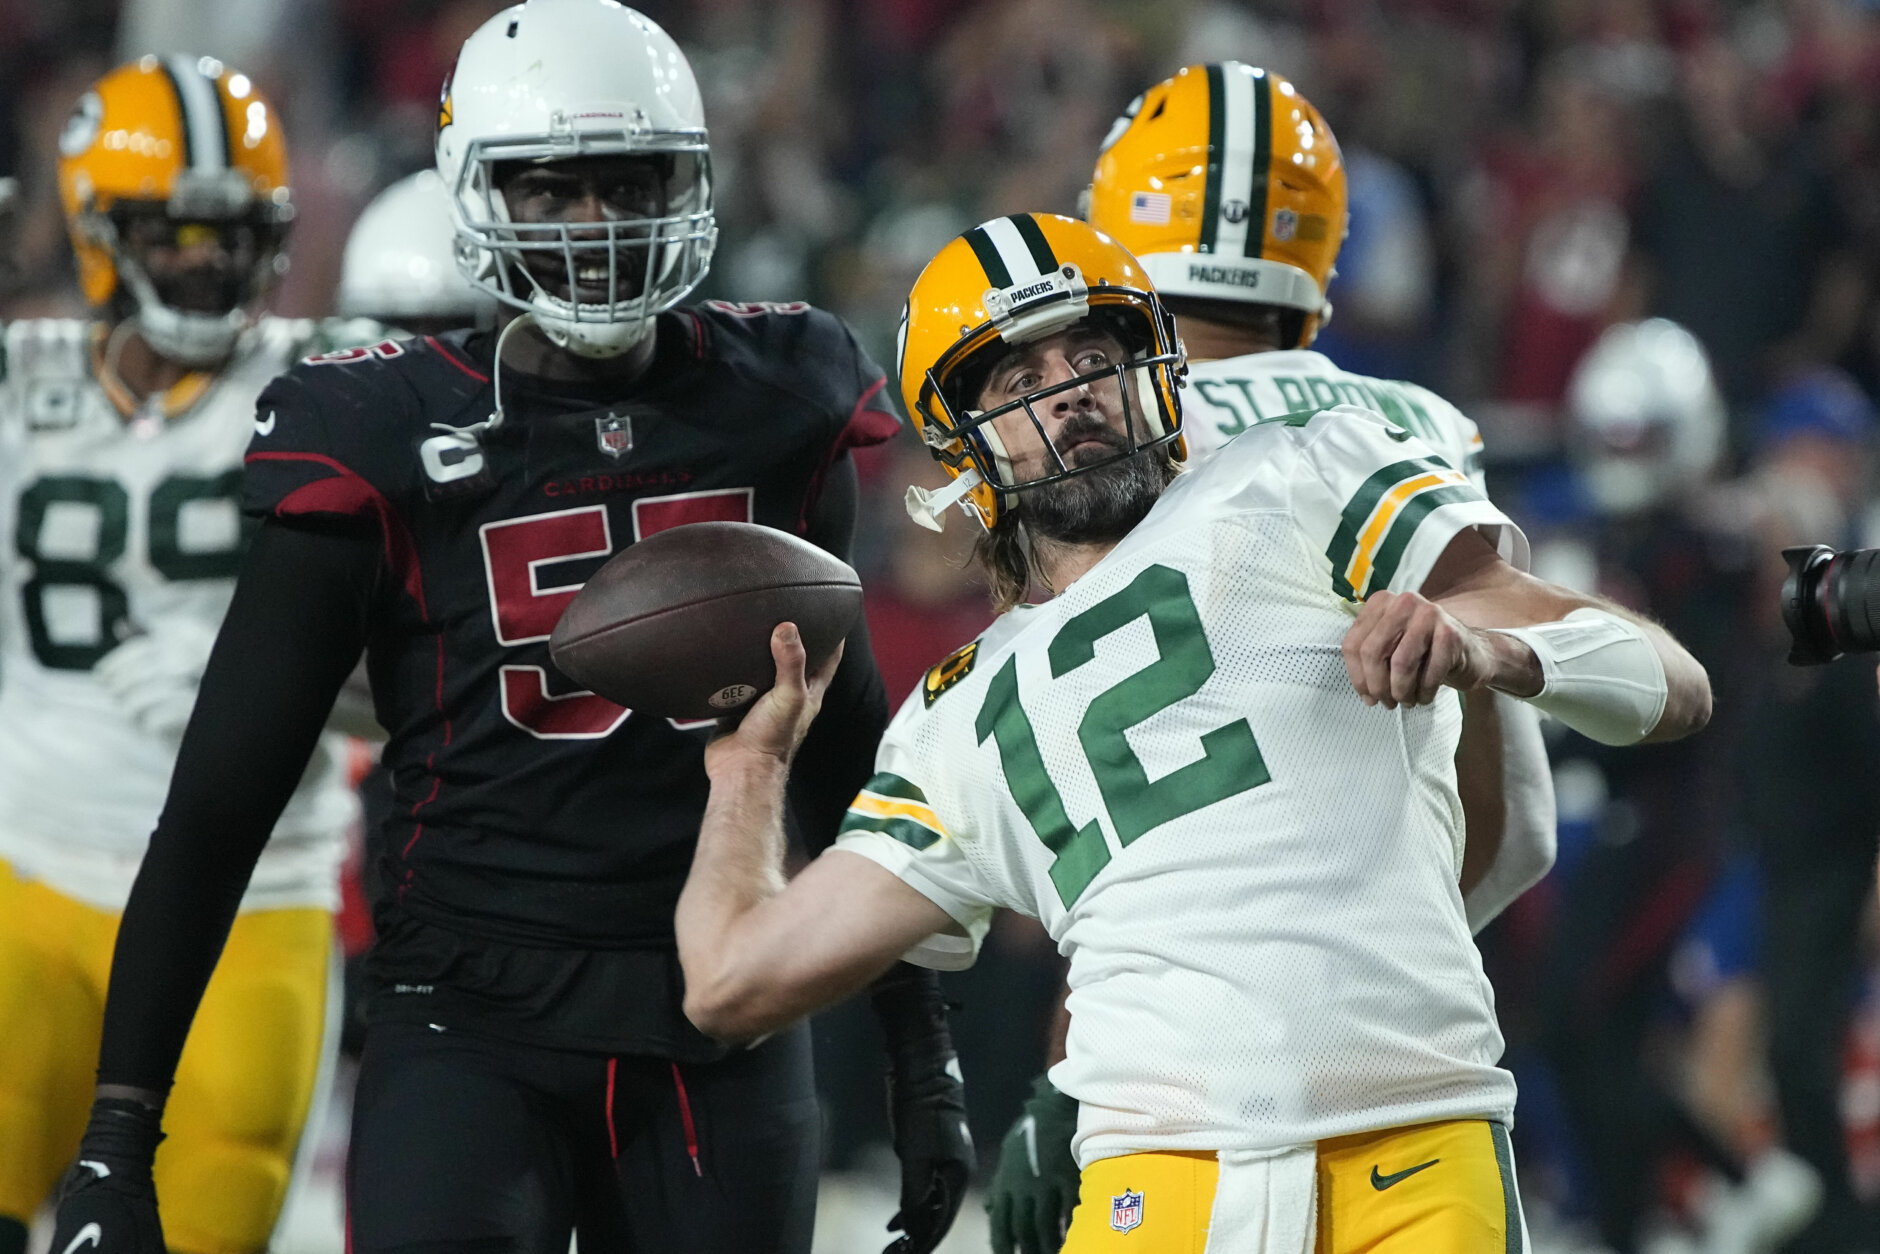 <p><b><i>Packers 24</i></b><br />
<b><i>Cardinals 21</i></b></p>
<p>At a time when <a href="https://profootballtalk.nbcsports.com/2021/10/28/kyler-murray-takes-big-step-in-year-3-with-passing-numbers-up-across-the-board/" target="_blank" rel="noopener">Kyler Murray was trending toward MVP numbers</a> and newcomer <a href="https://profootballtalk.nbcsports.com/2021/10/25/zach-ertz-we-have-a-lot-of-talent-ive-never-seen-so-much-green-grass-in-the-middle-of-the-field/" target="_blank" rel="noopener">Zach Ertz was frolicking in the middle of opposing defenses</a>, Green Bay put a stop to all that to deal the Cards their first loss and grab the inside track in the race for home field advantage in the NFC. This is Aaron Rodgers&#8217; world and we&#8217;re all just trespassing.</p>
